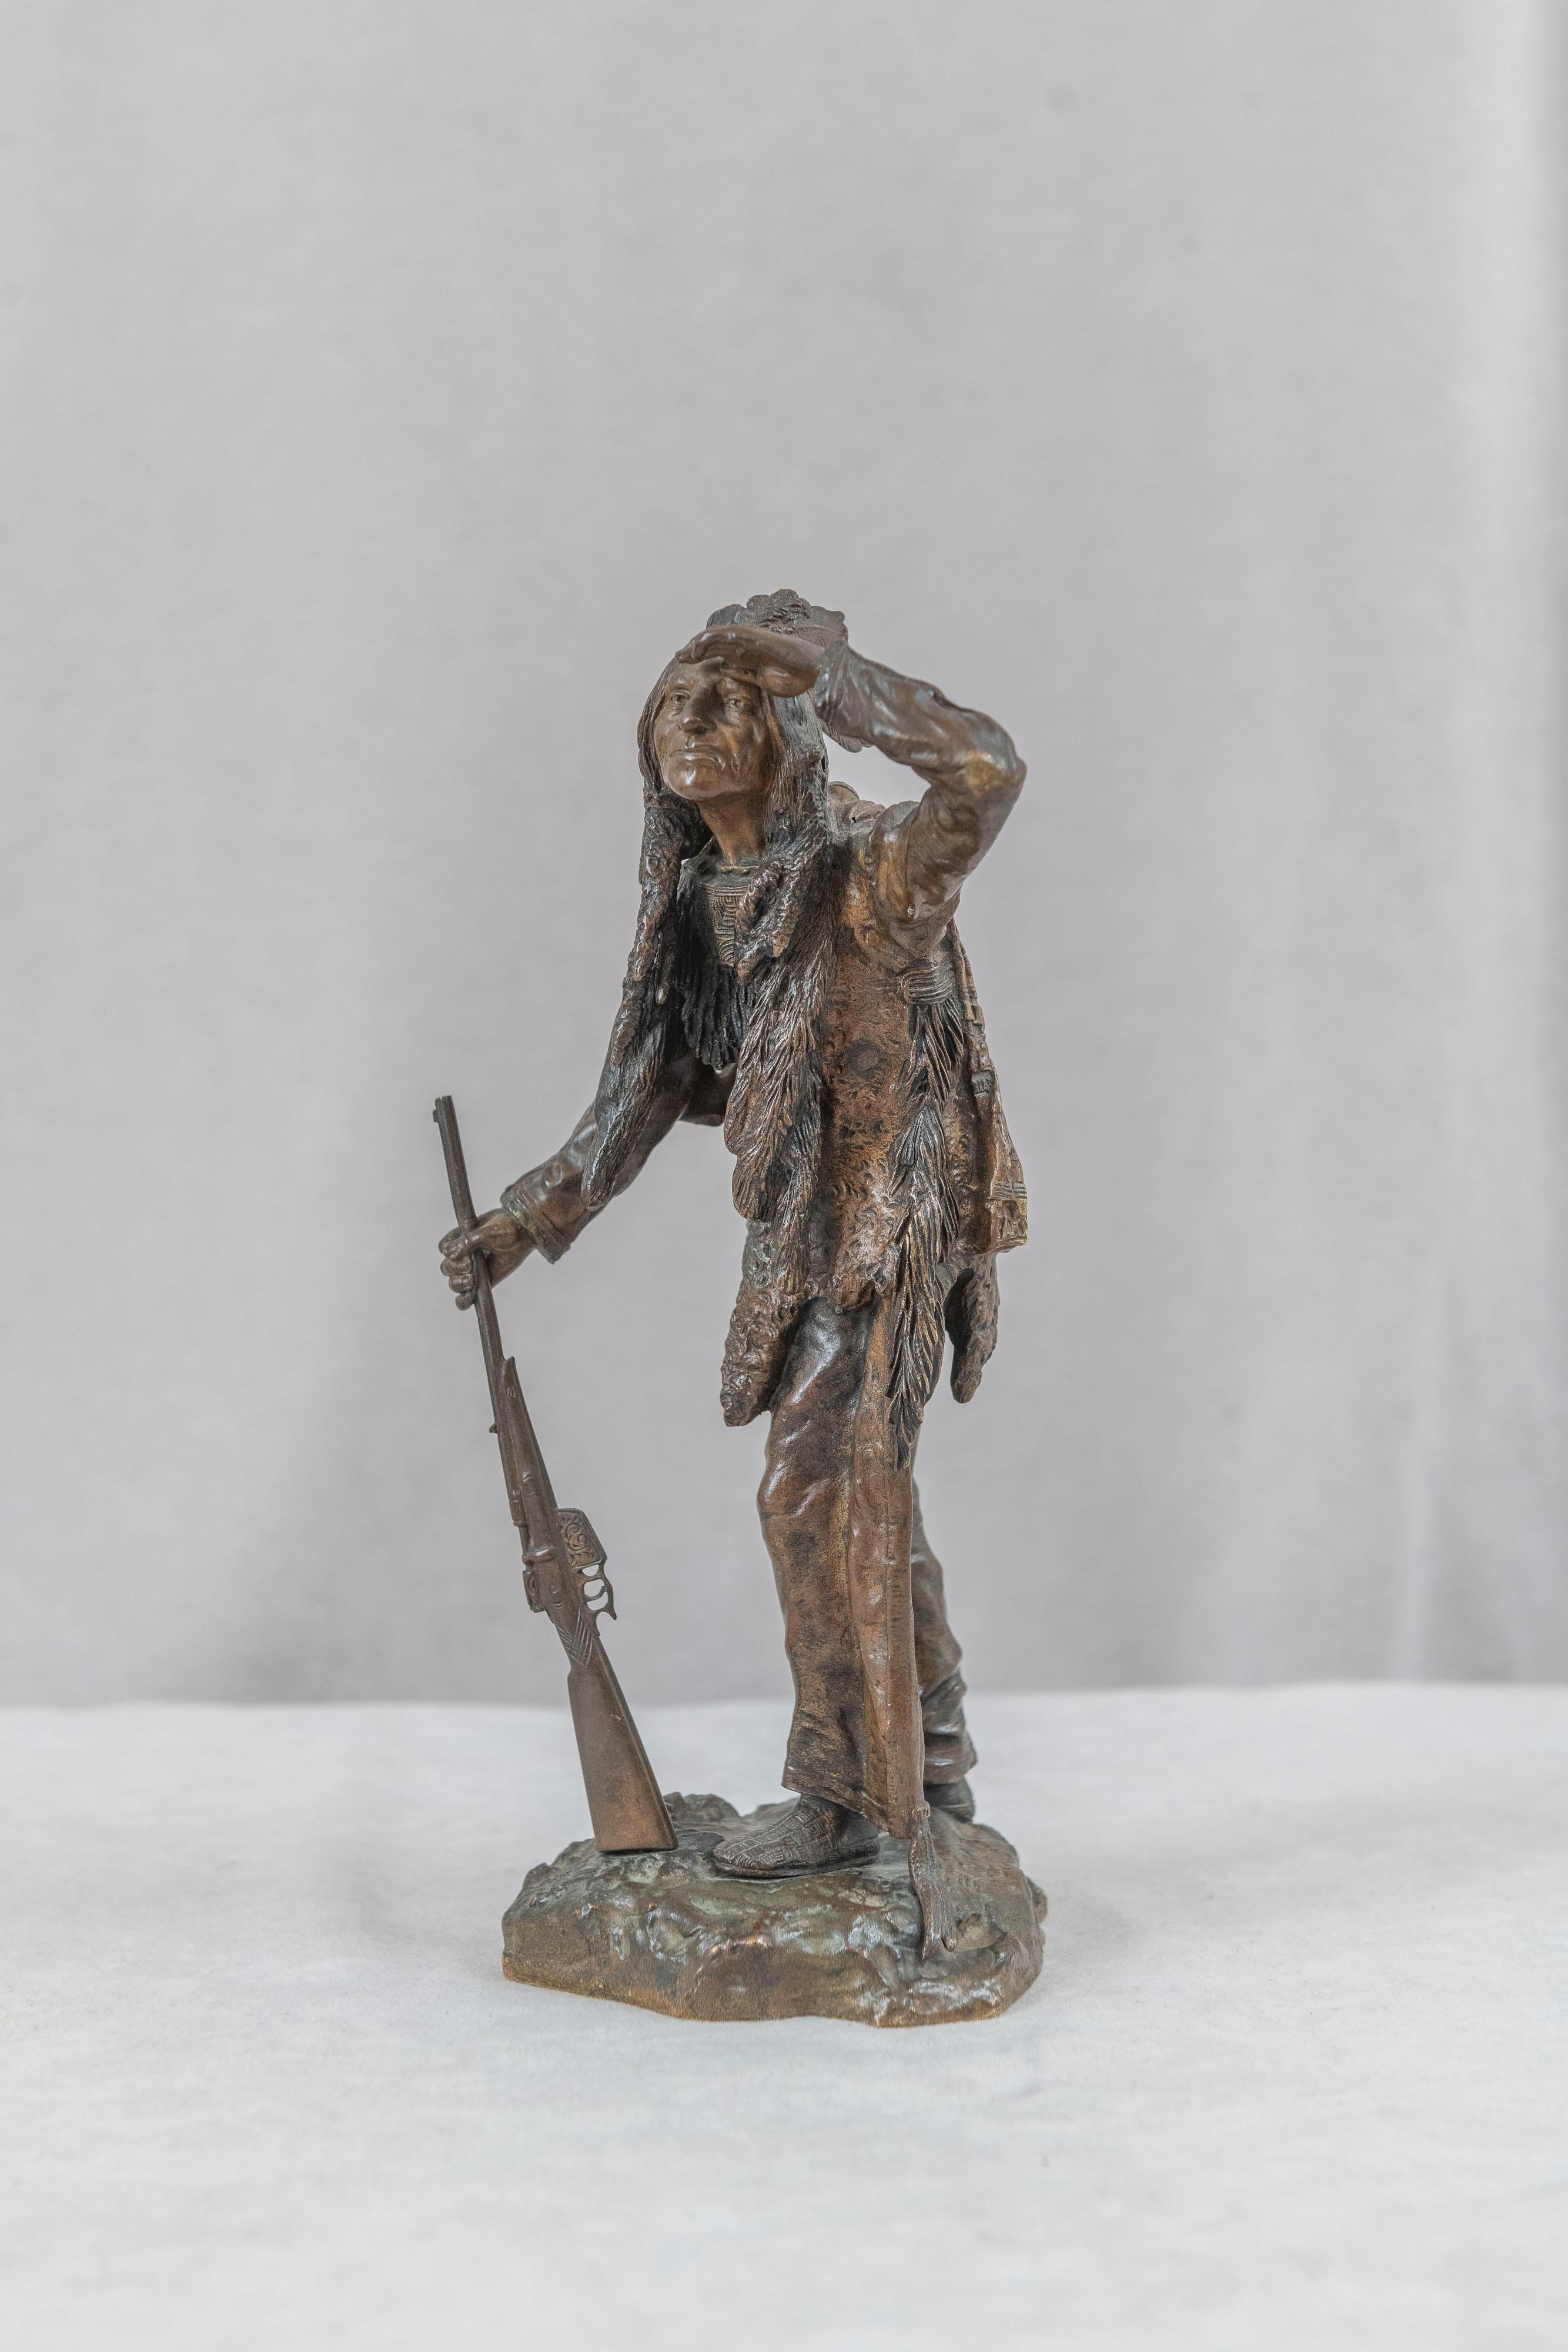  This exceptional bronze casting of an American Standing Indian with his rifle was done by the noted Austrian artist Carl Kauba (1865-1922). Known primarily for his finely detailed bronzes of Indians, although he did other exotic subjects. If you